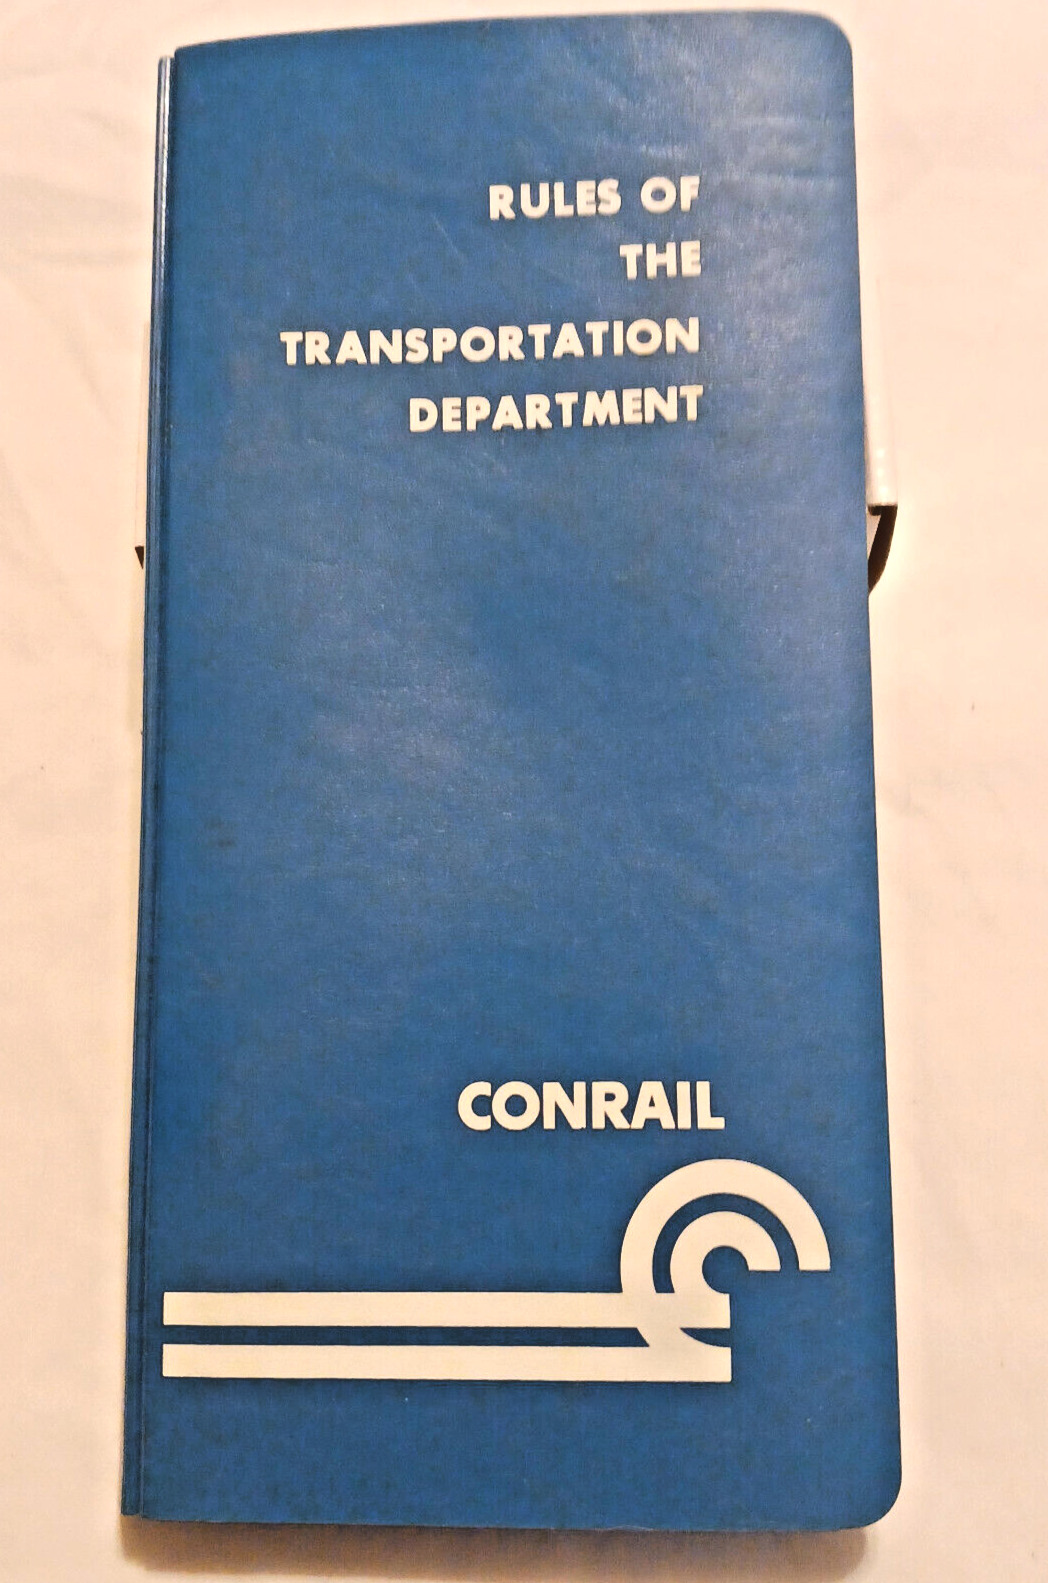 1979-80 Conrail Railway Rules of the Transportation Department Booklet